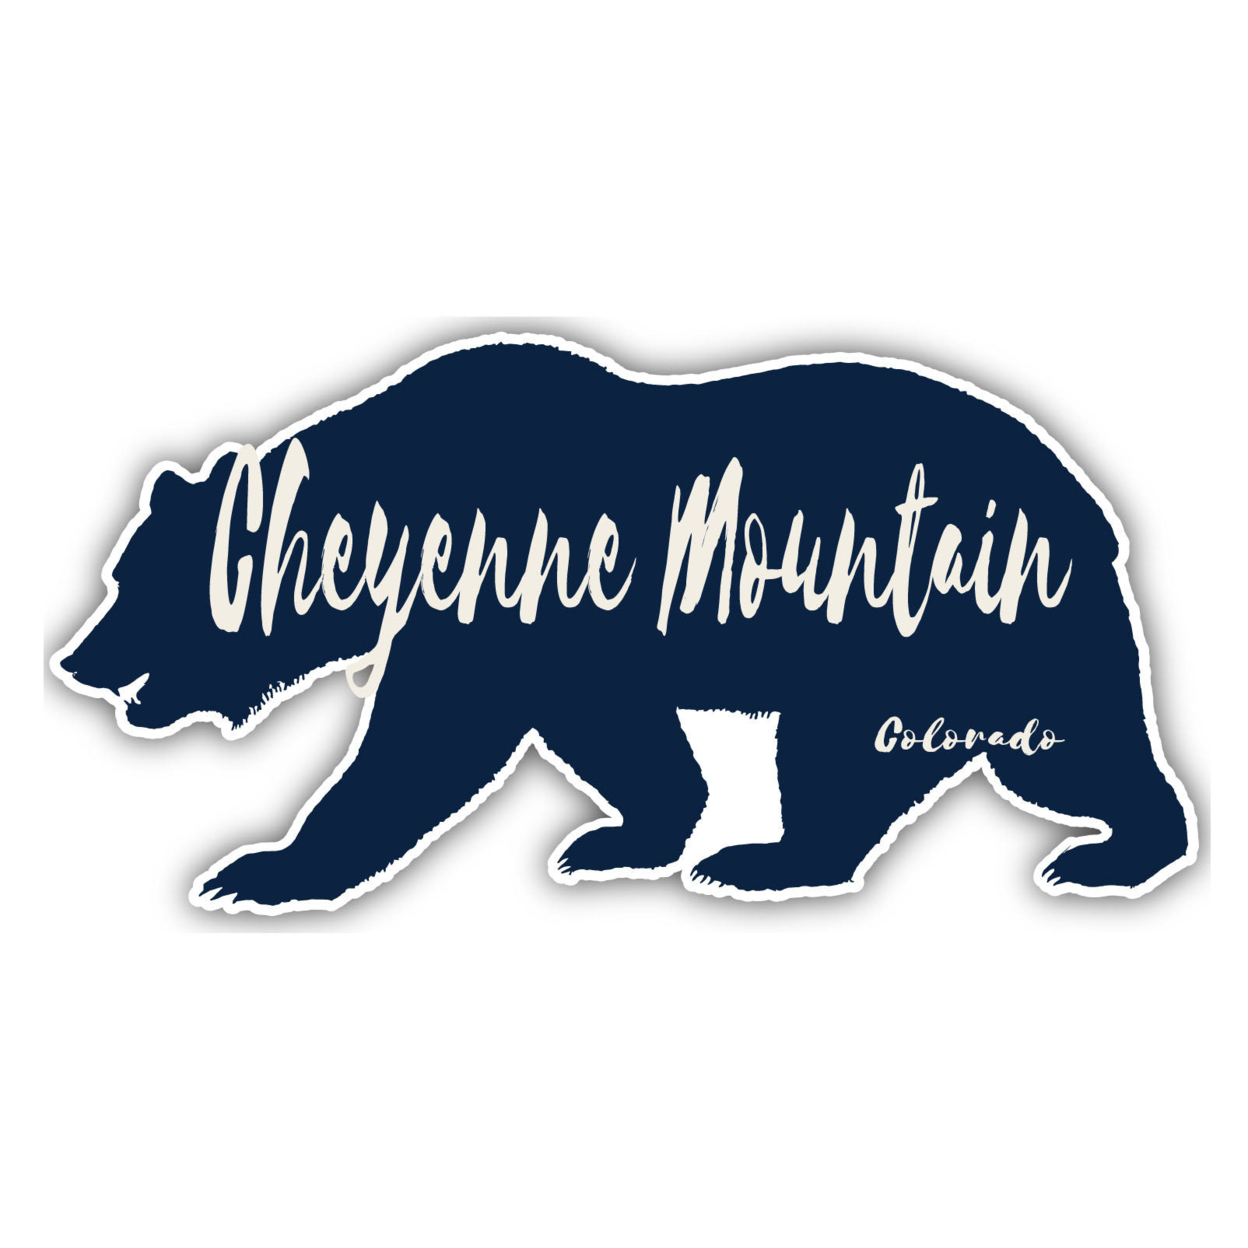 Cheyenne Mountain Colorado Souvenir Decorative Stickers (Choose Theme And Size) - 4-Pack, 6-Inch, Tent